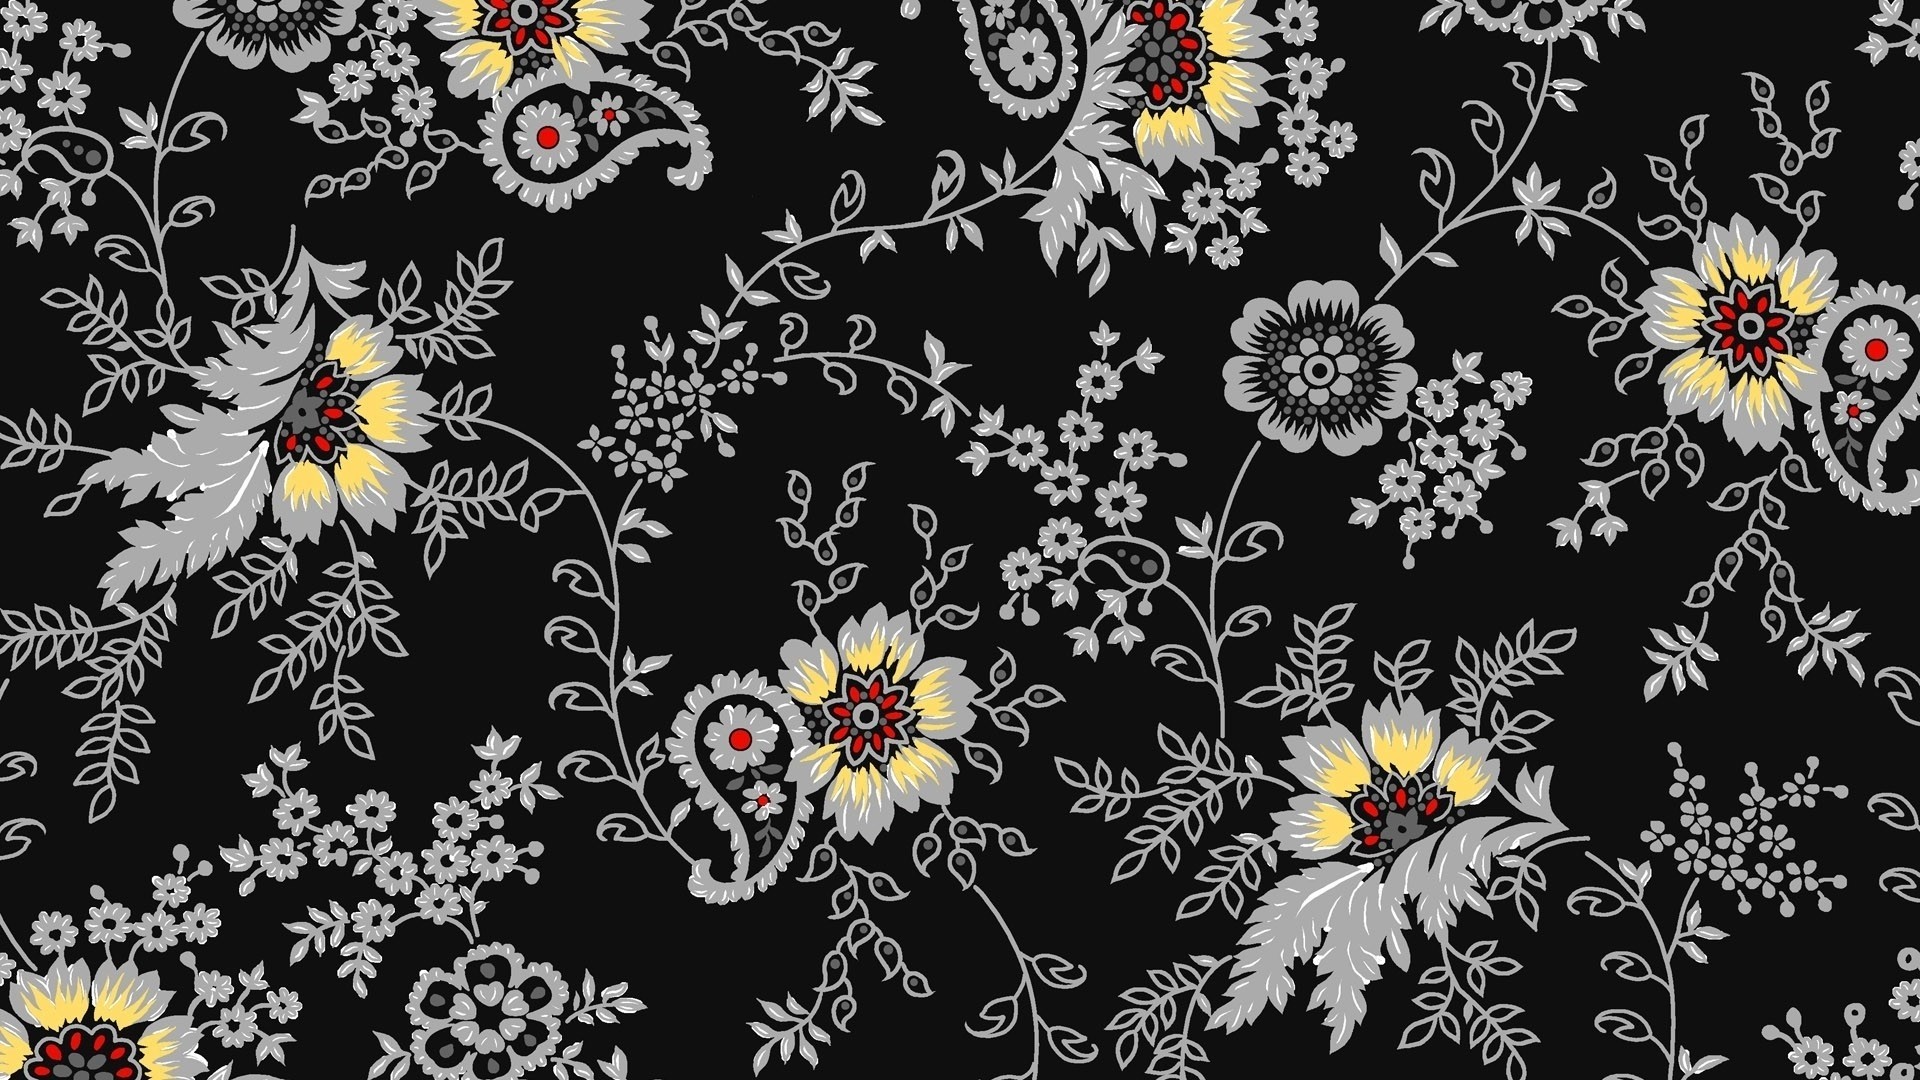 Black And White Floral Wallpaper image hd